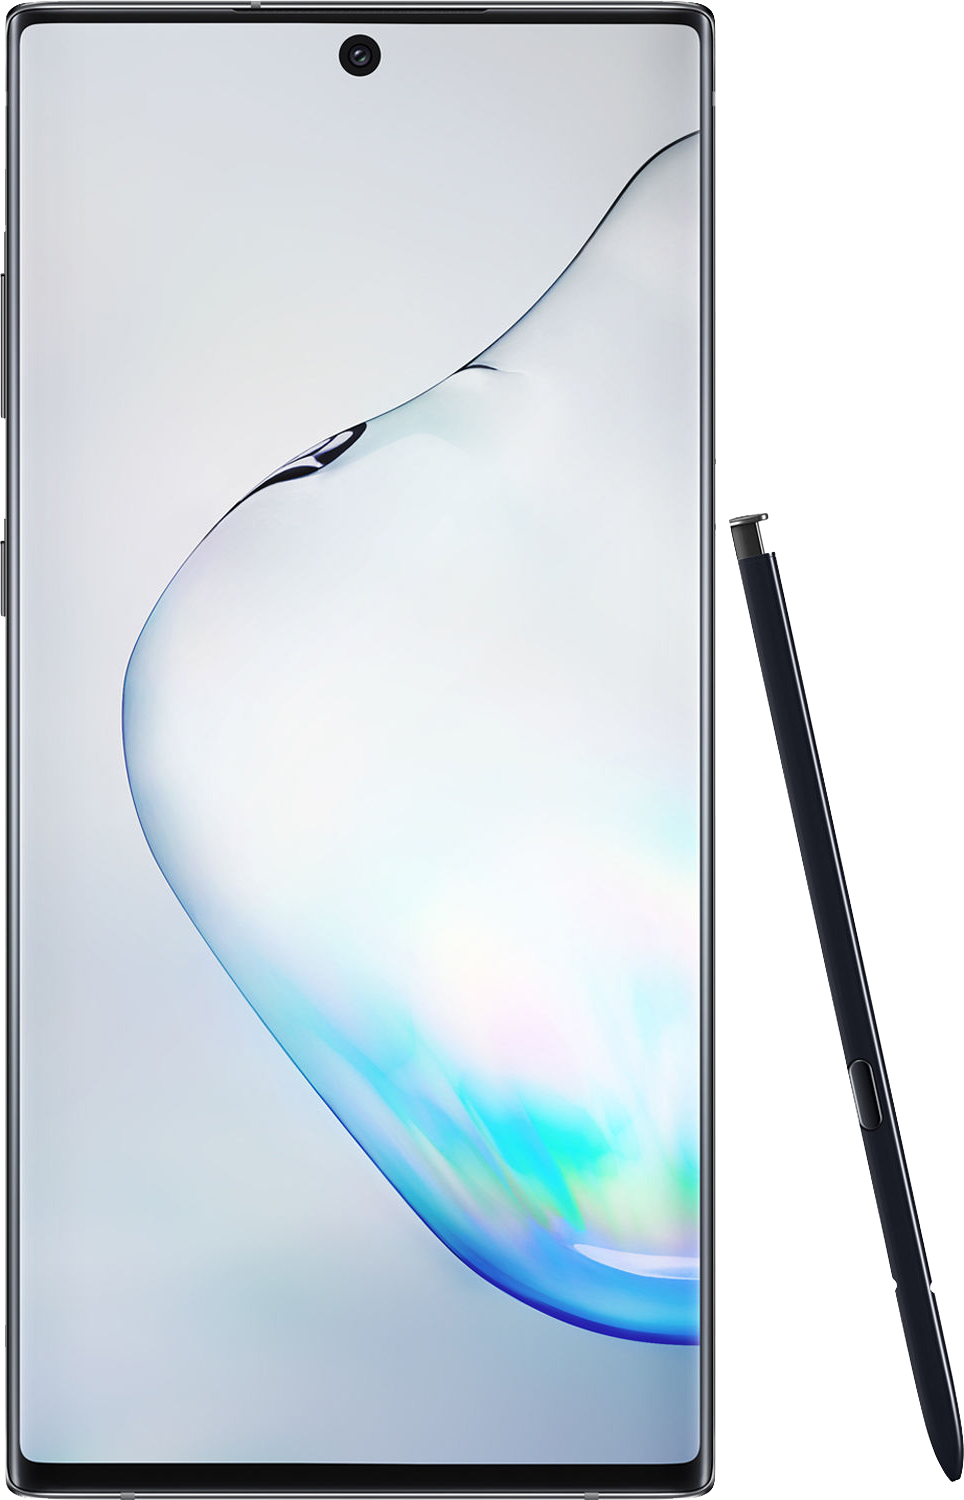 galaxy-note-10-plus-front-render.png?ito